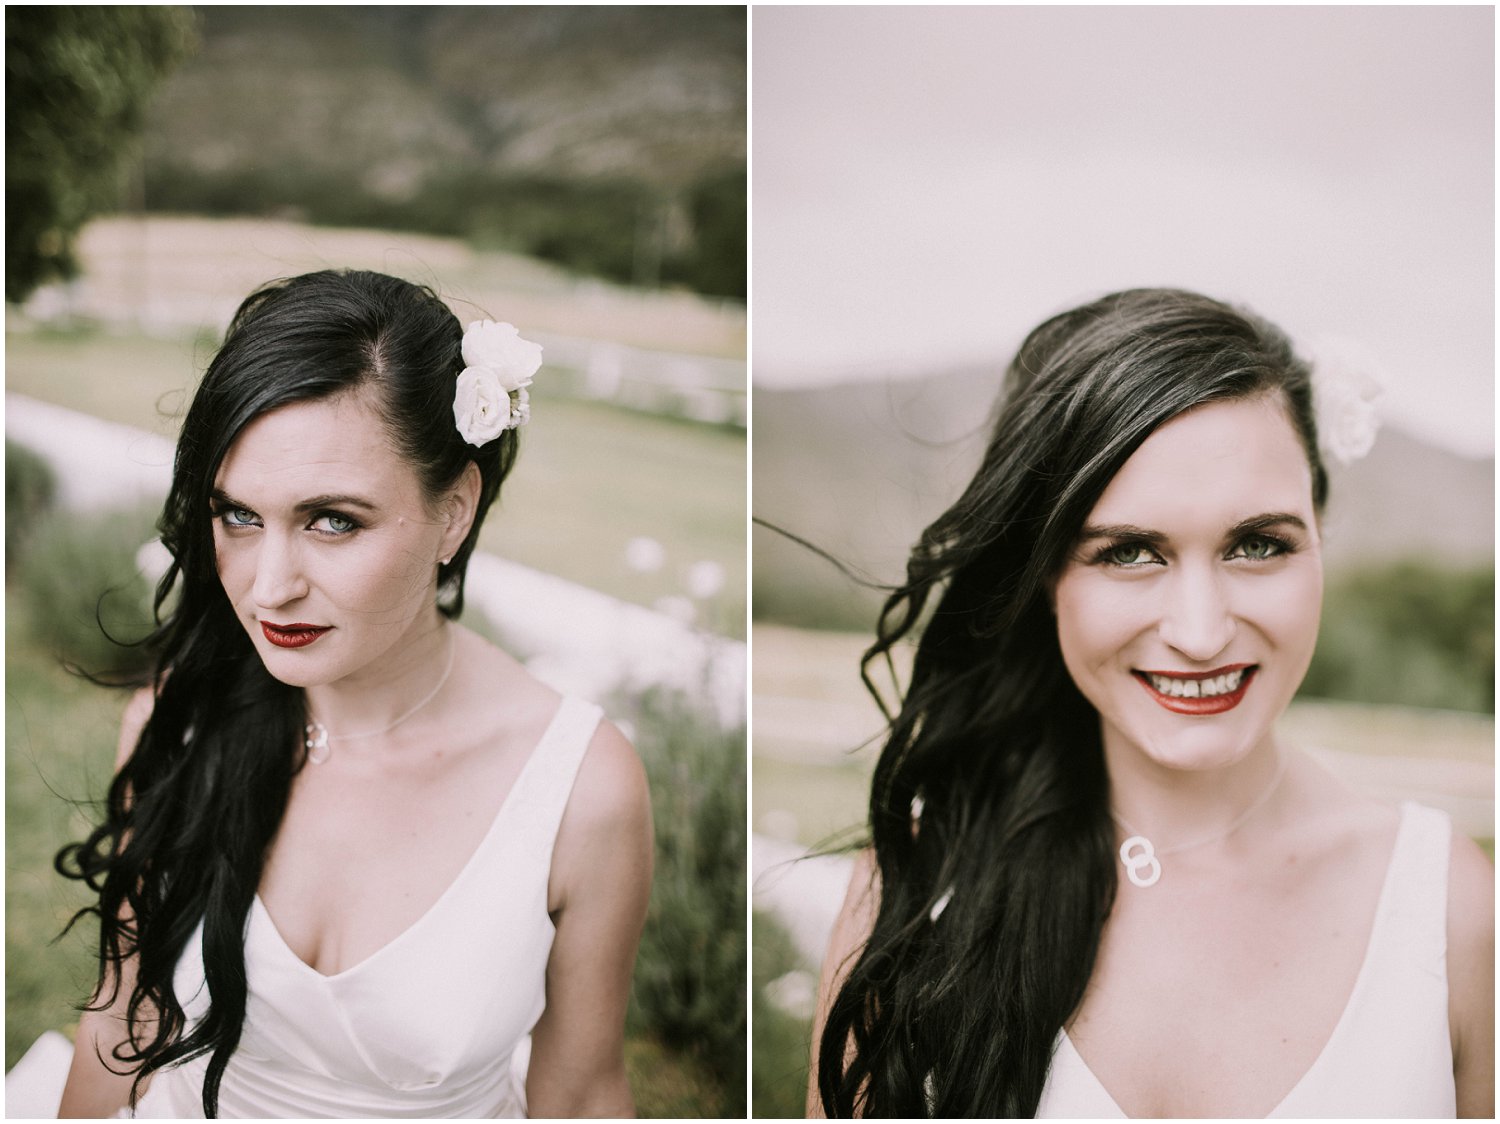 Top Wedding Photographer Cape Town South Africa Artistic Creative Documentary Wedding Photography Rue Kruger_0834.jpg